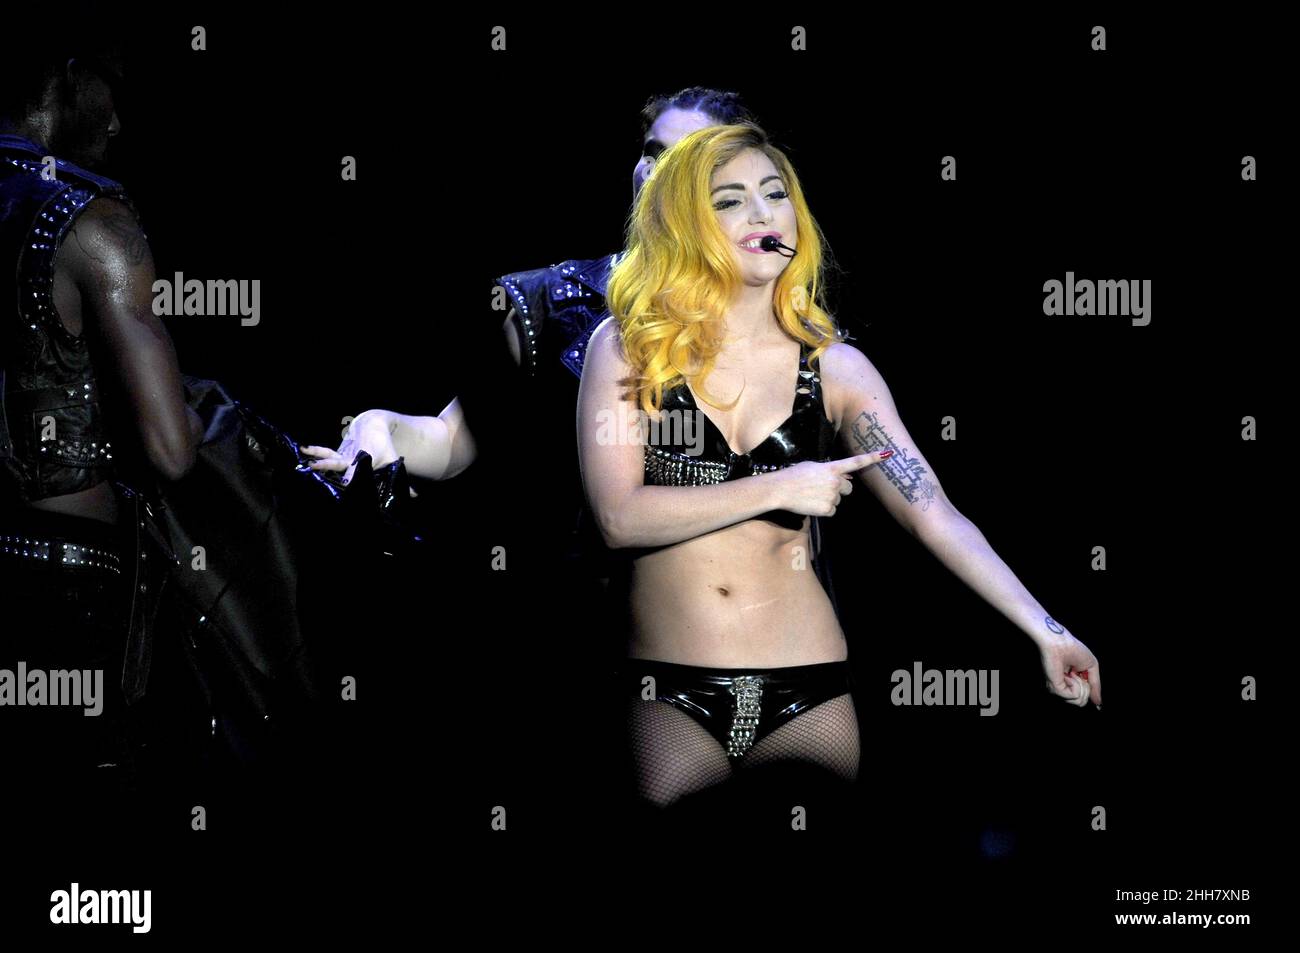 Turin Italy 2010-11-09 : Live concert of the american singer-songwriter Lady Gaga at the Palaolimpico , The Monster Ball Tour Stock Photo